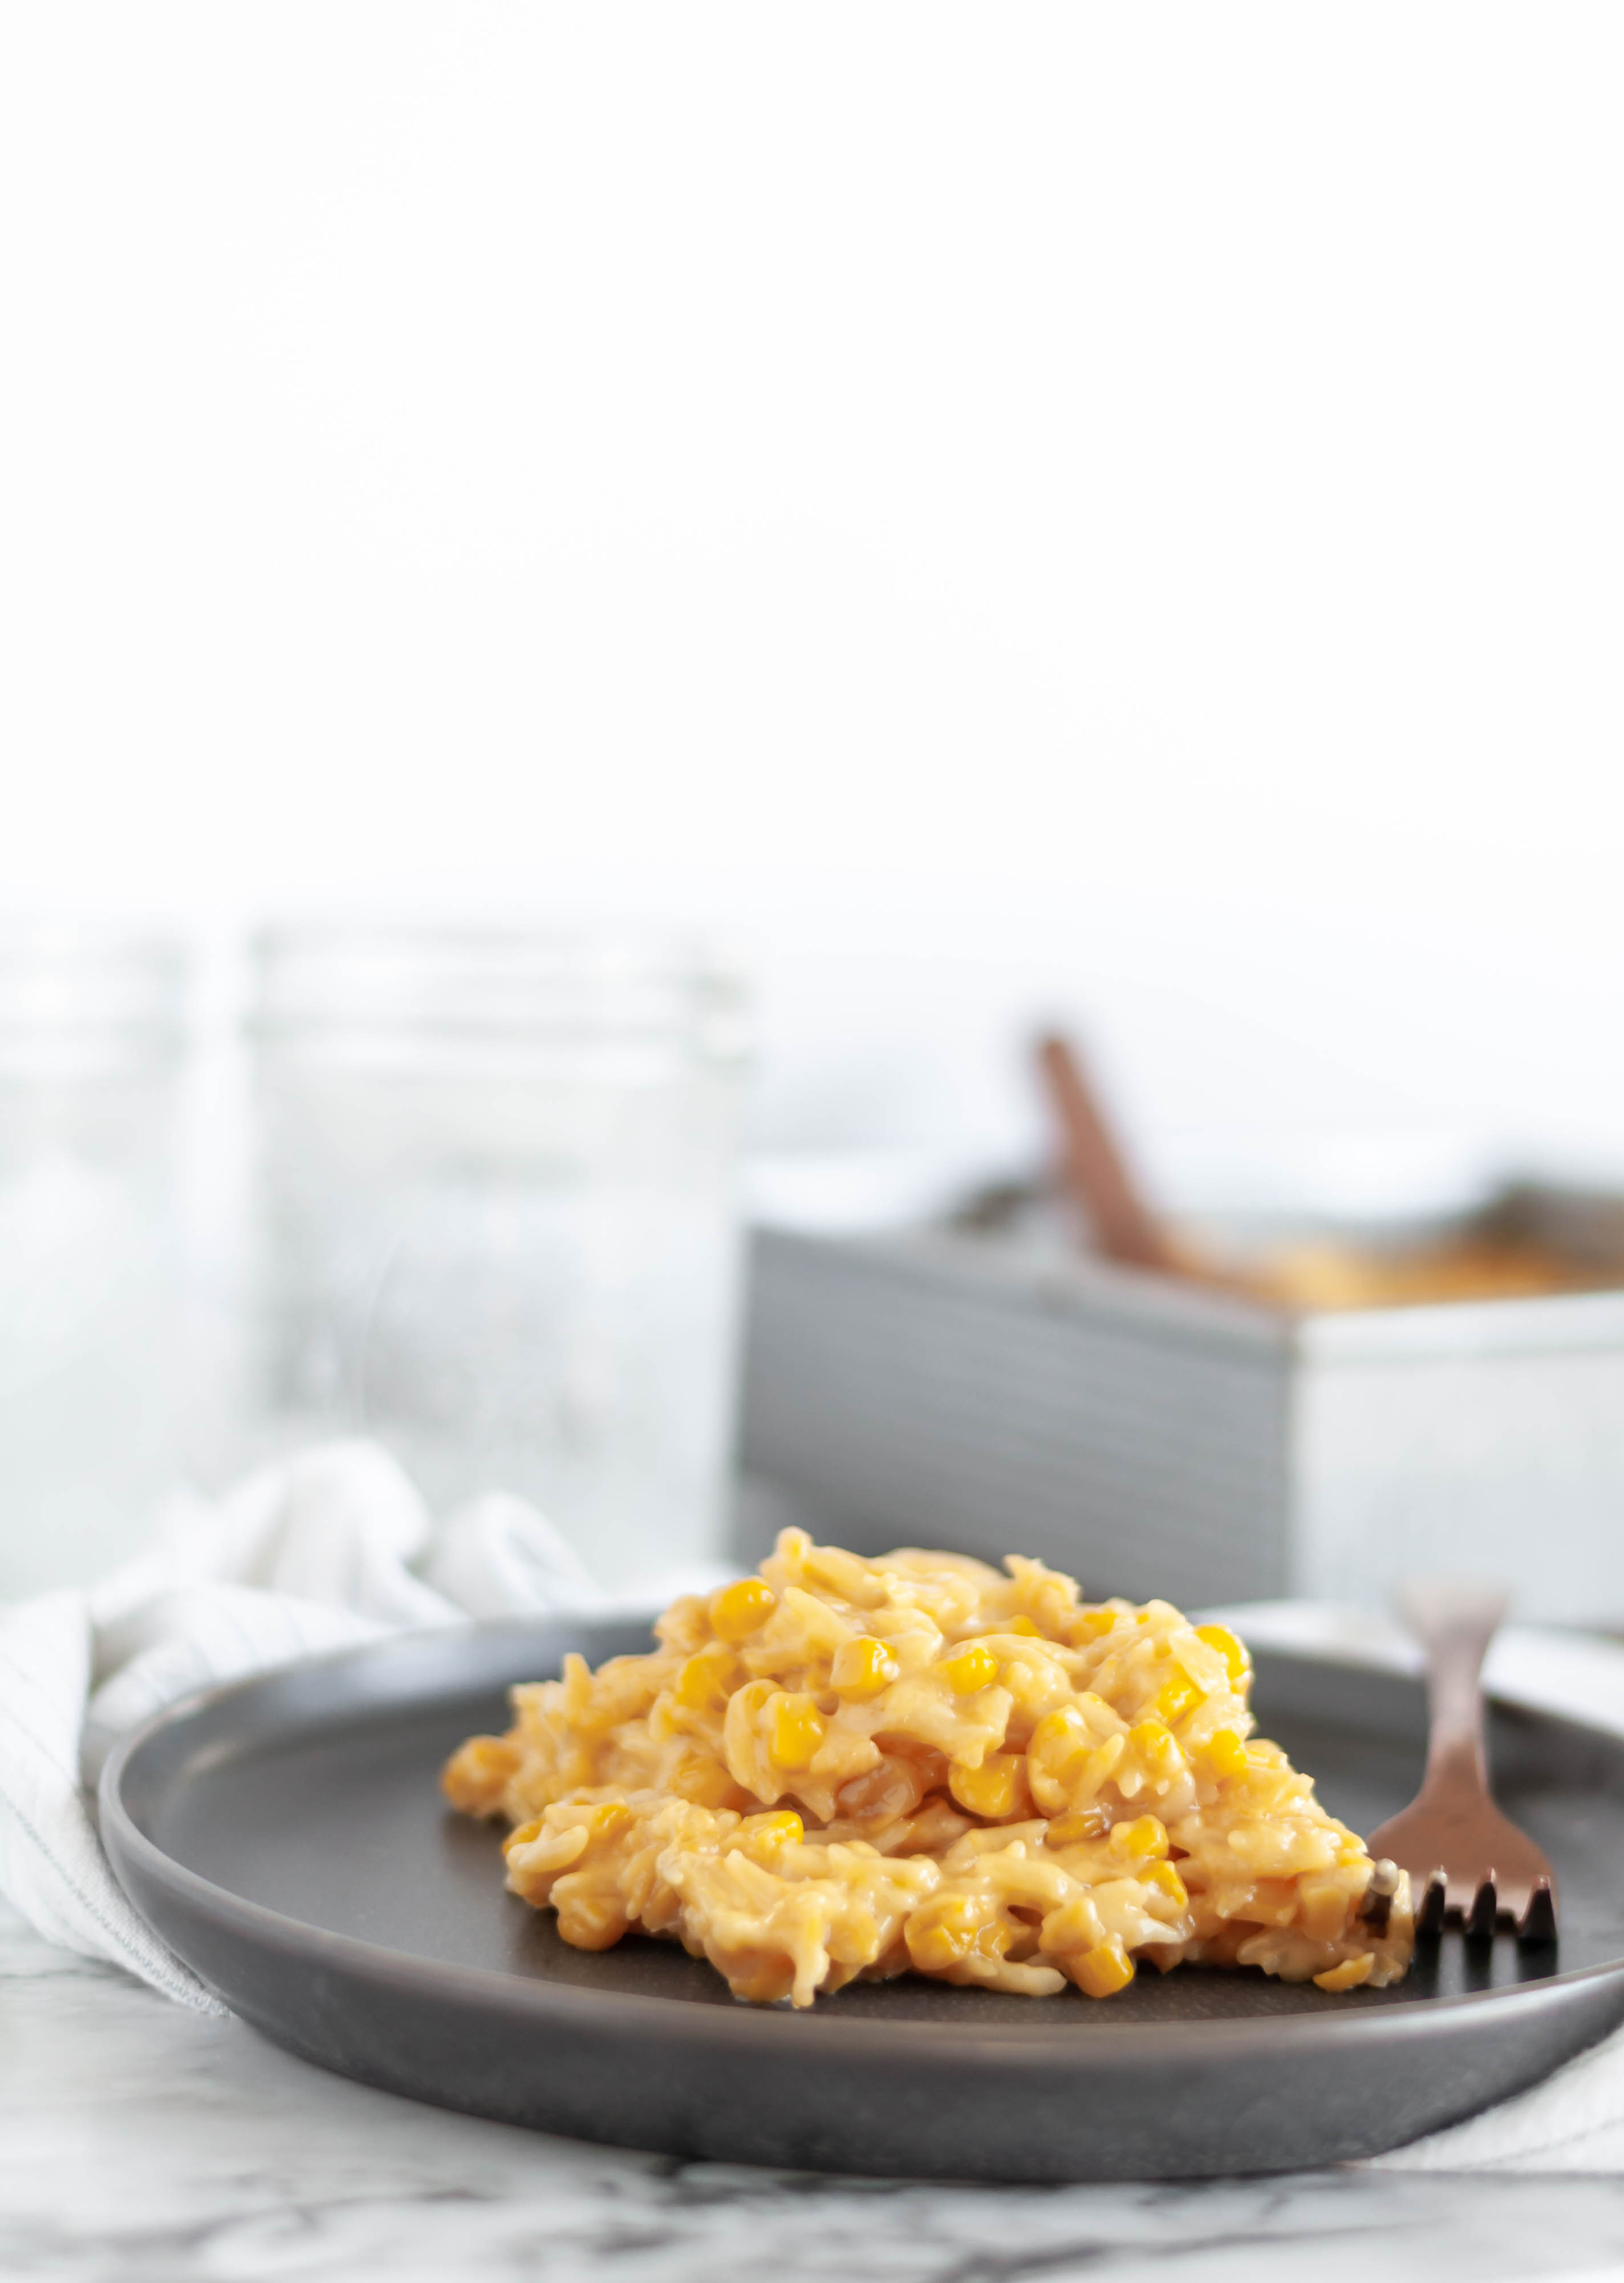 Corn Casserole is a family favorite that graces every holiday table. A super simple ingredient list and even easier preparation.